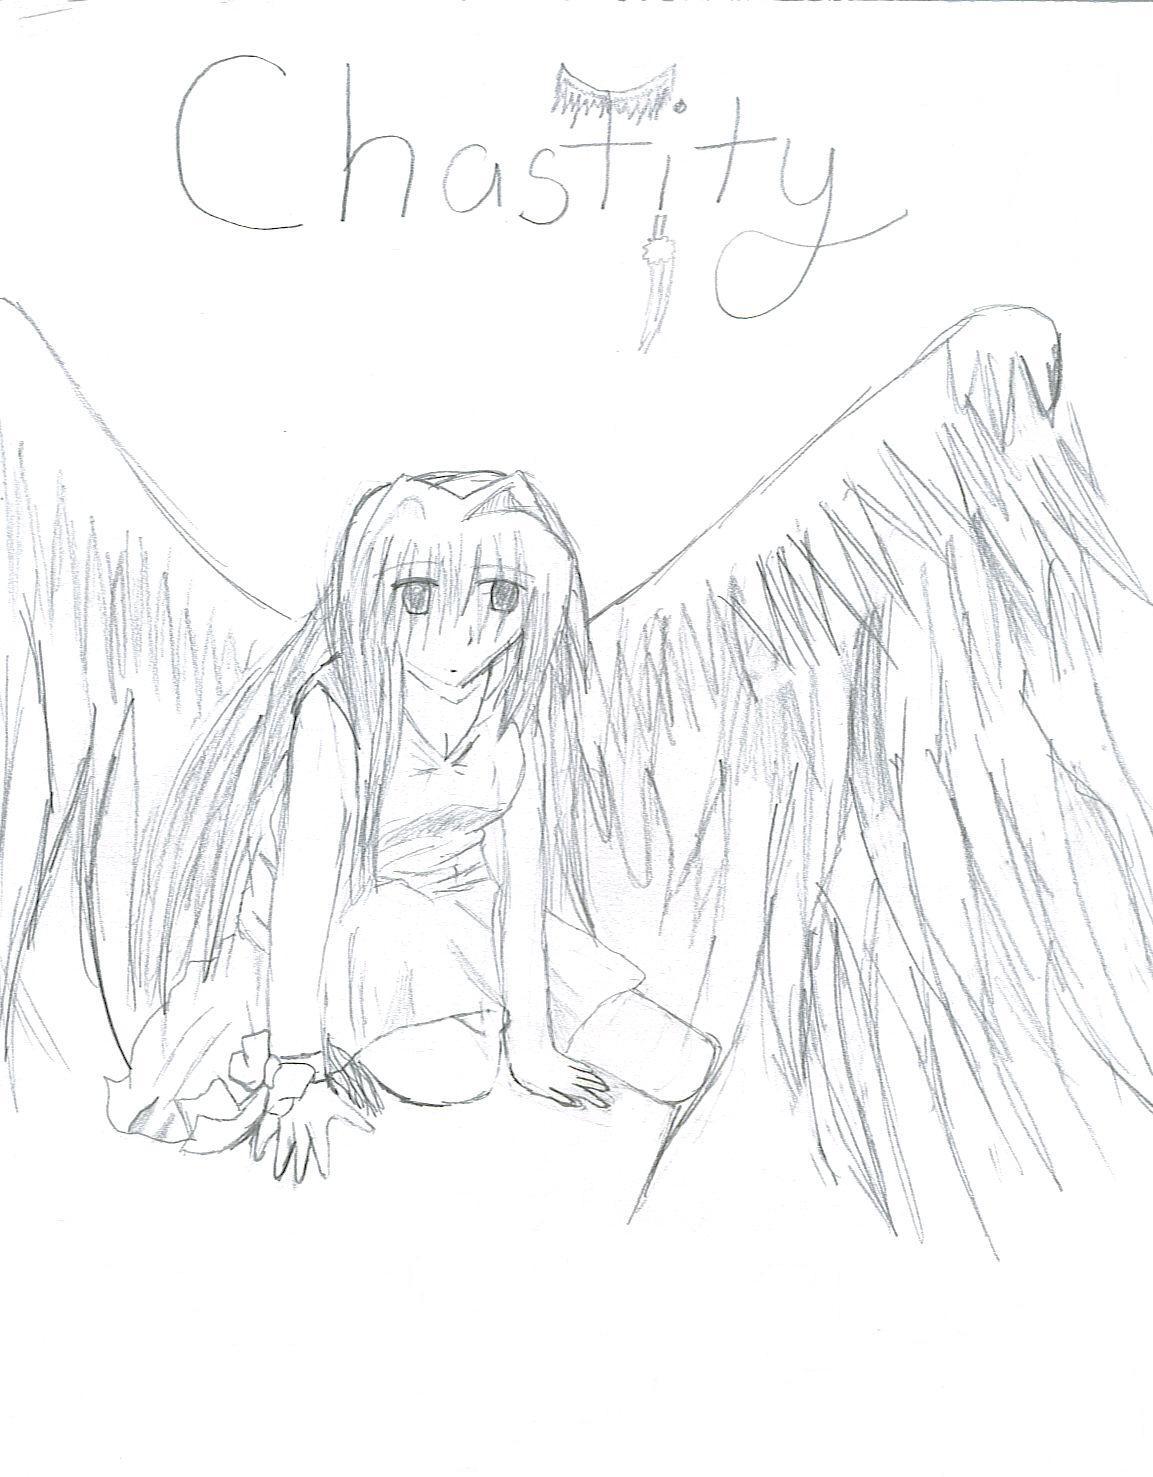 Angel of Chastity by Clouds_gurl